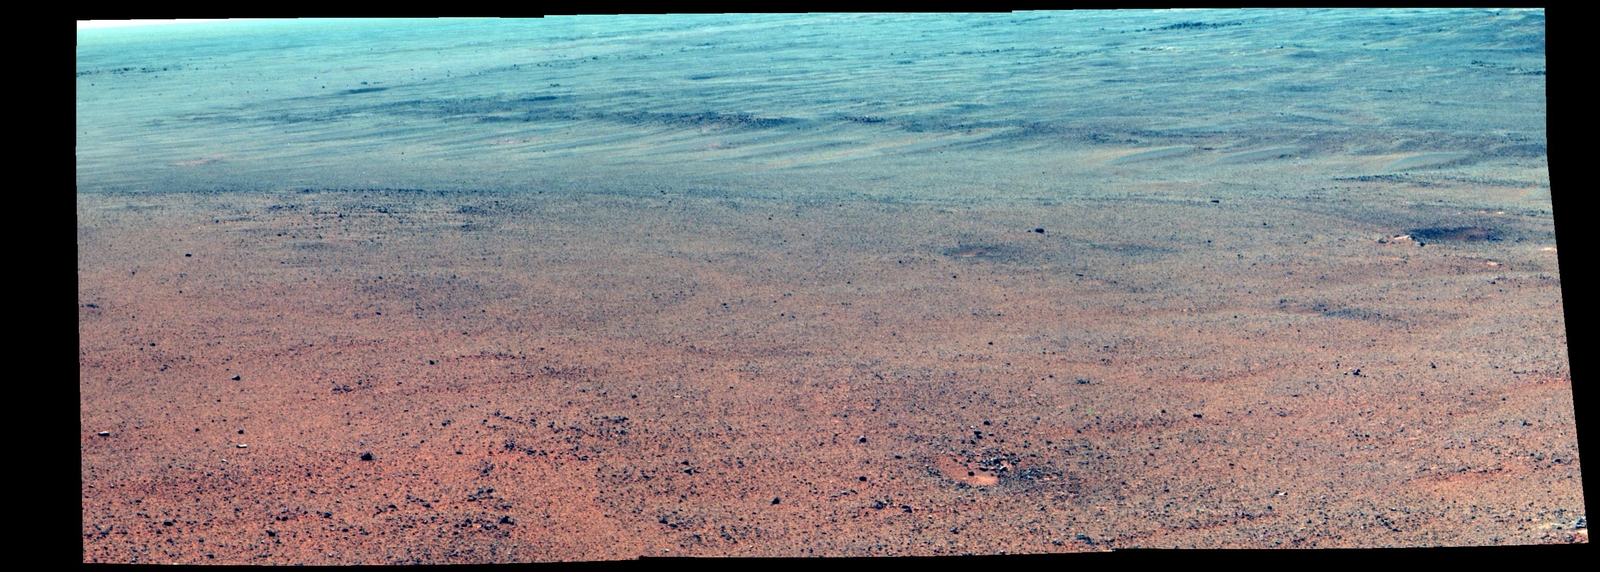 The Pancam on NASA's Mars Exploration Rover Opportunity took the component images of this enhanced-color scene during the mission's "walkabout" survey of an area just above the top of "Perseverance Valley," in preparation for driving down the valley.